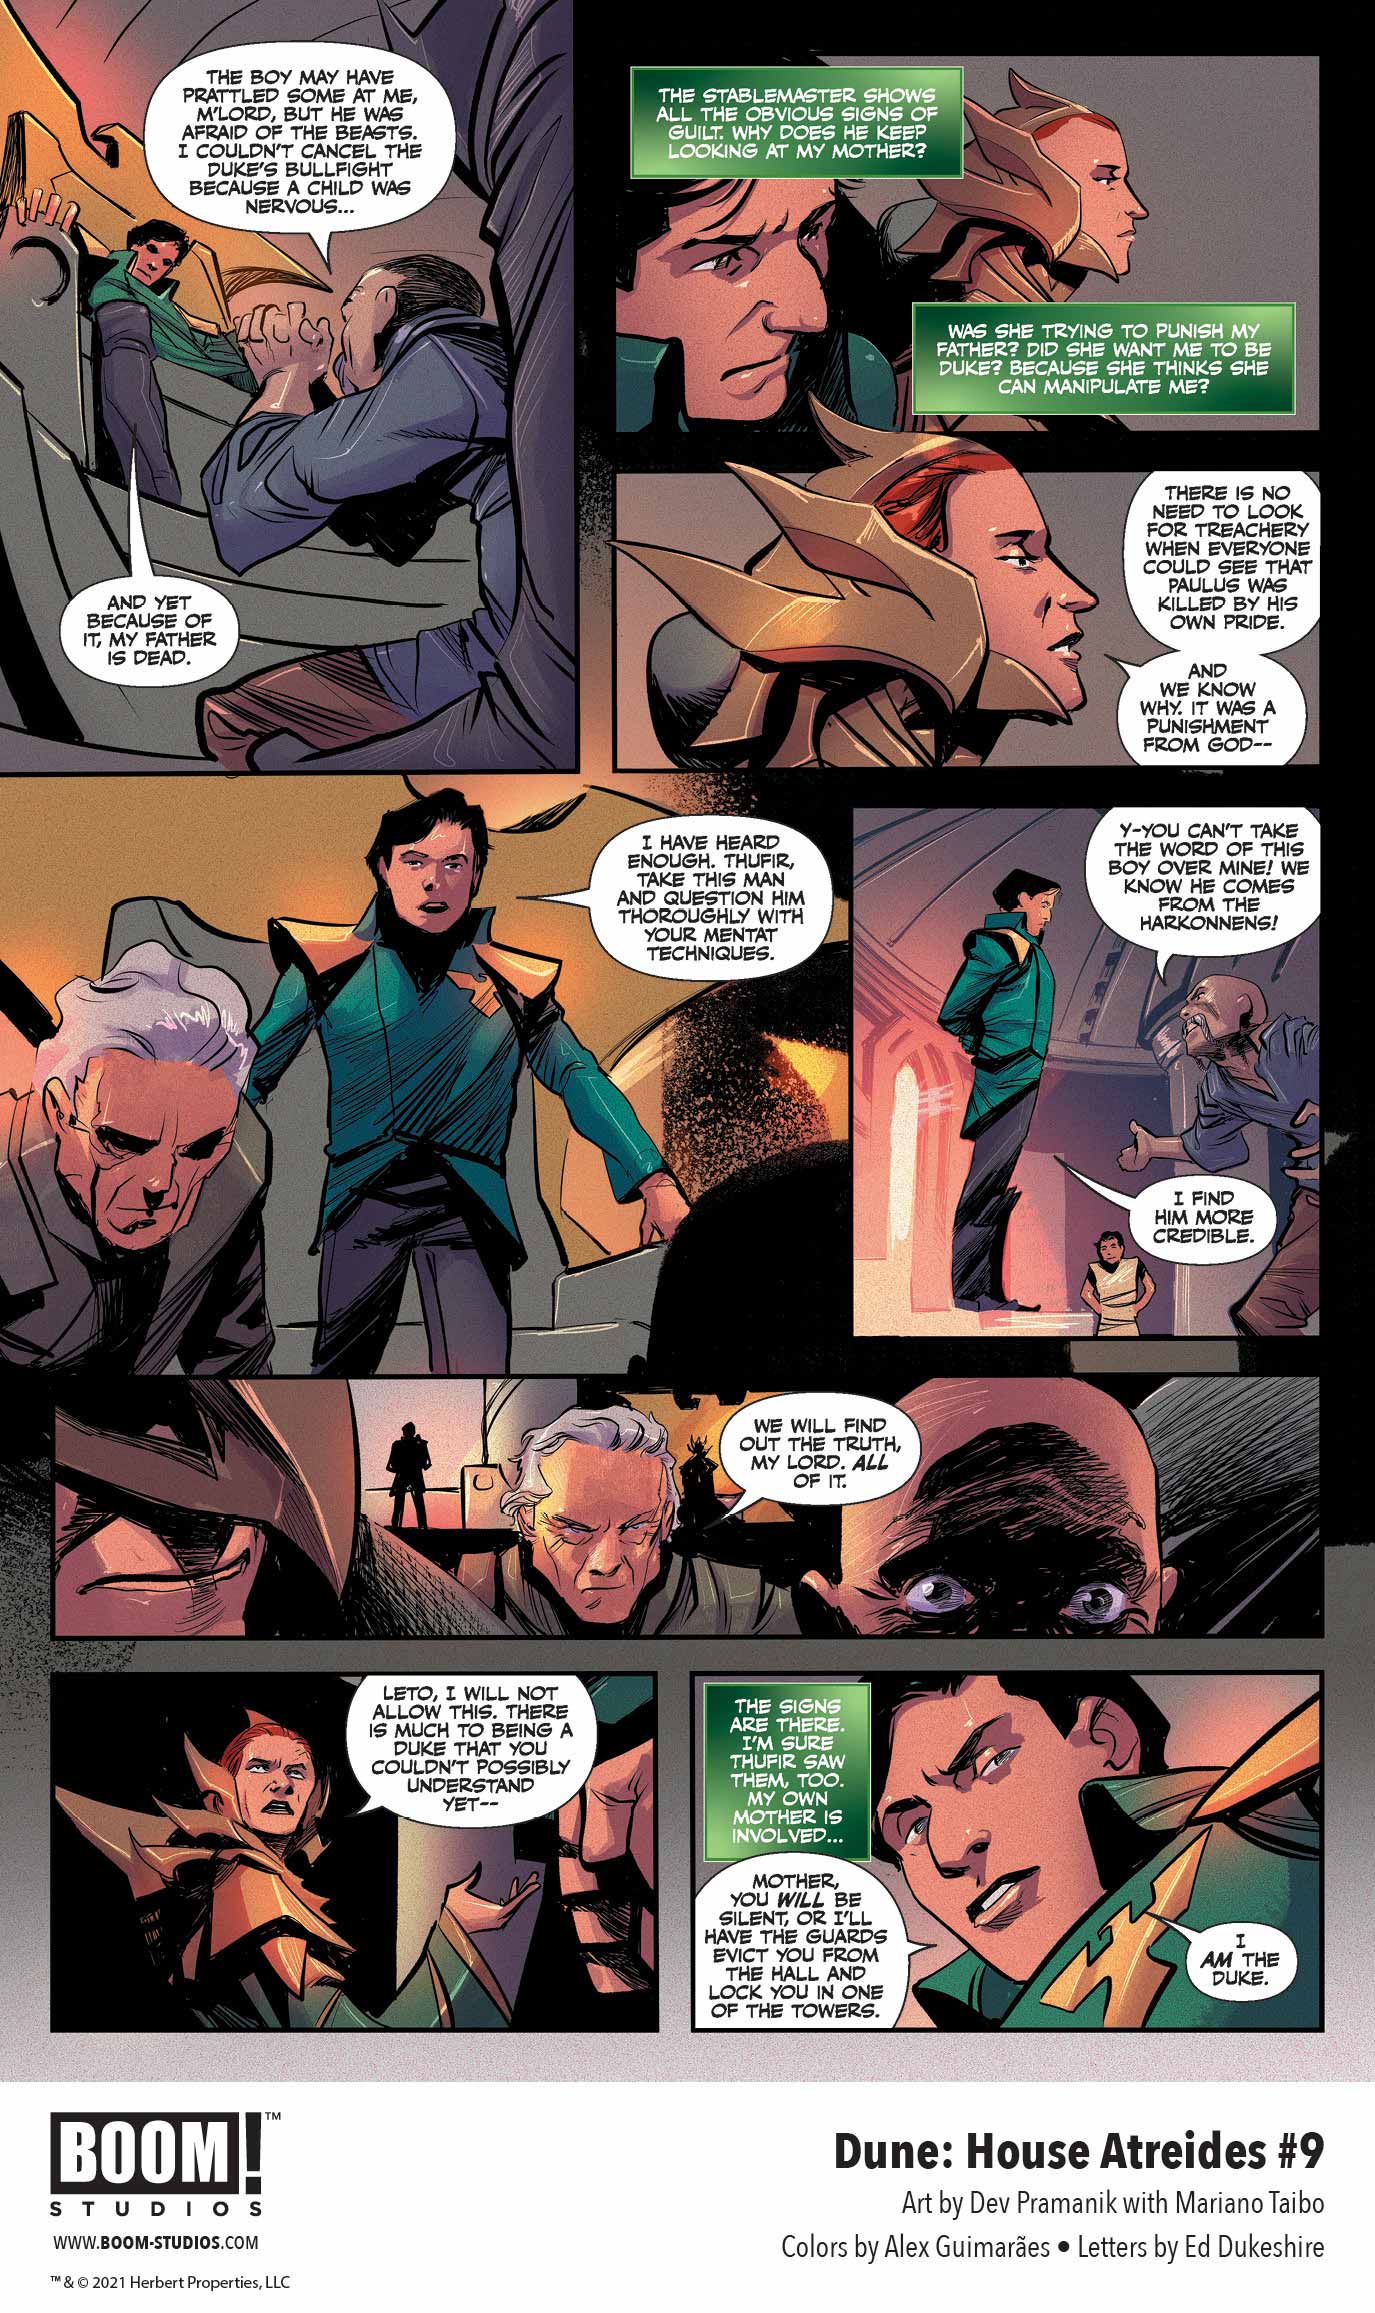 Dune: House Atreides comic series. Issue #9, preview page 5.